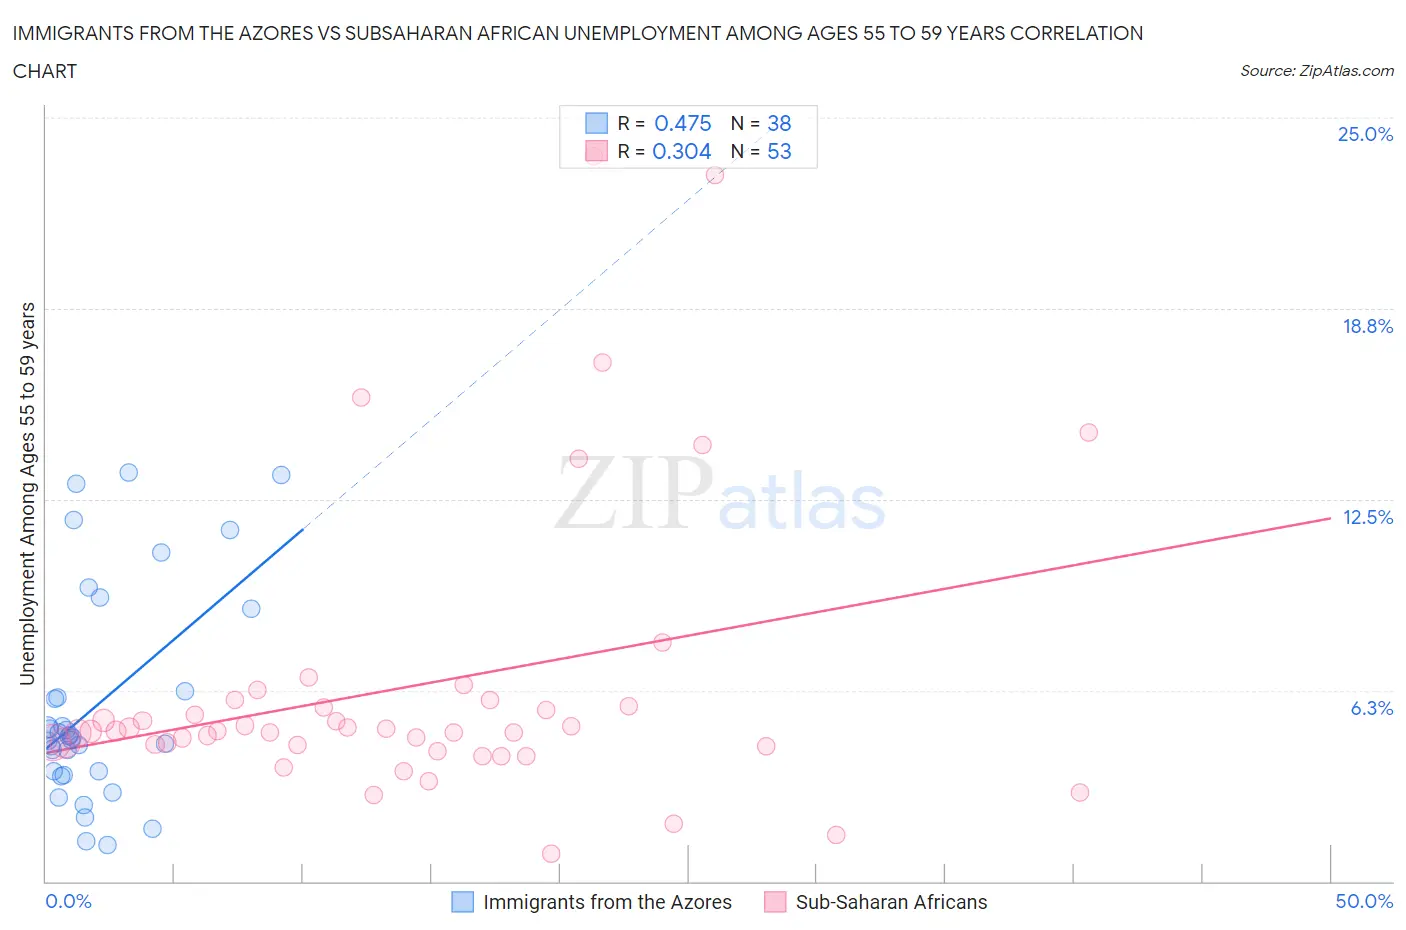 Immigrants from the Azores vs Subsaharan African Unemployment Among Ages 55 to 59 years